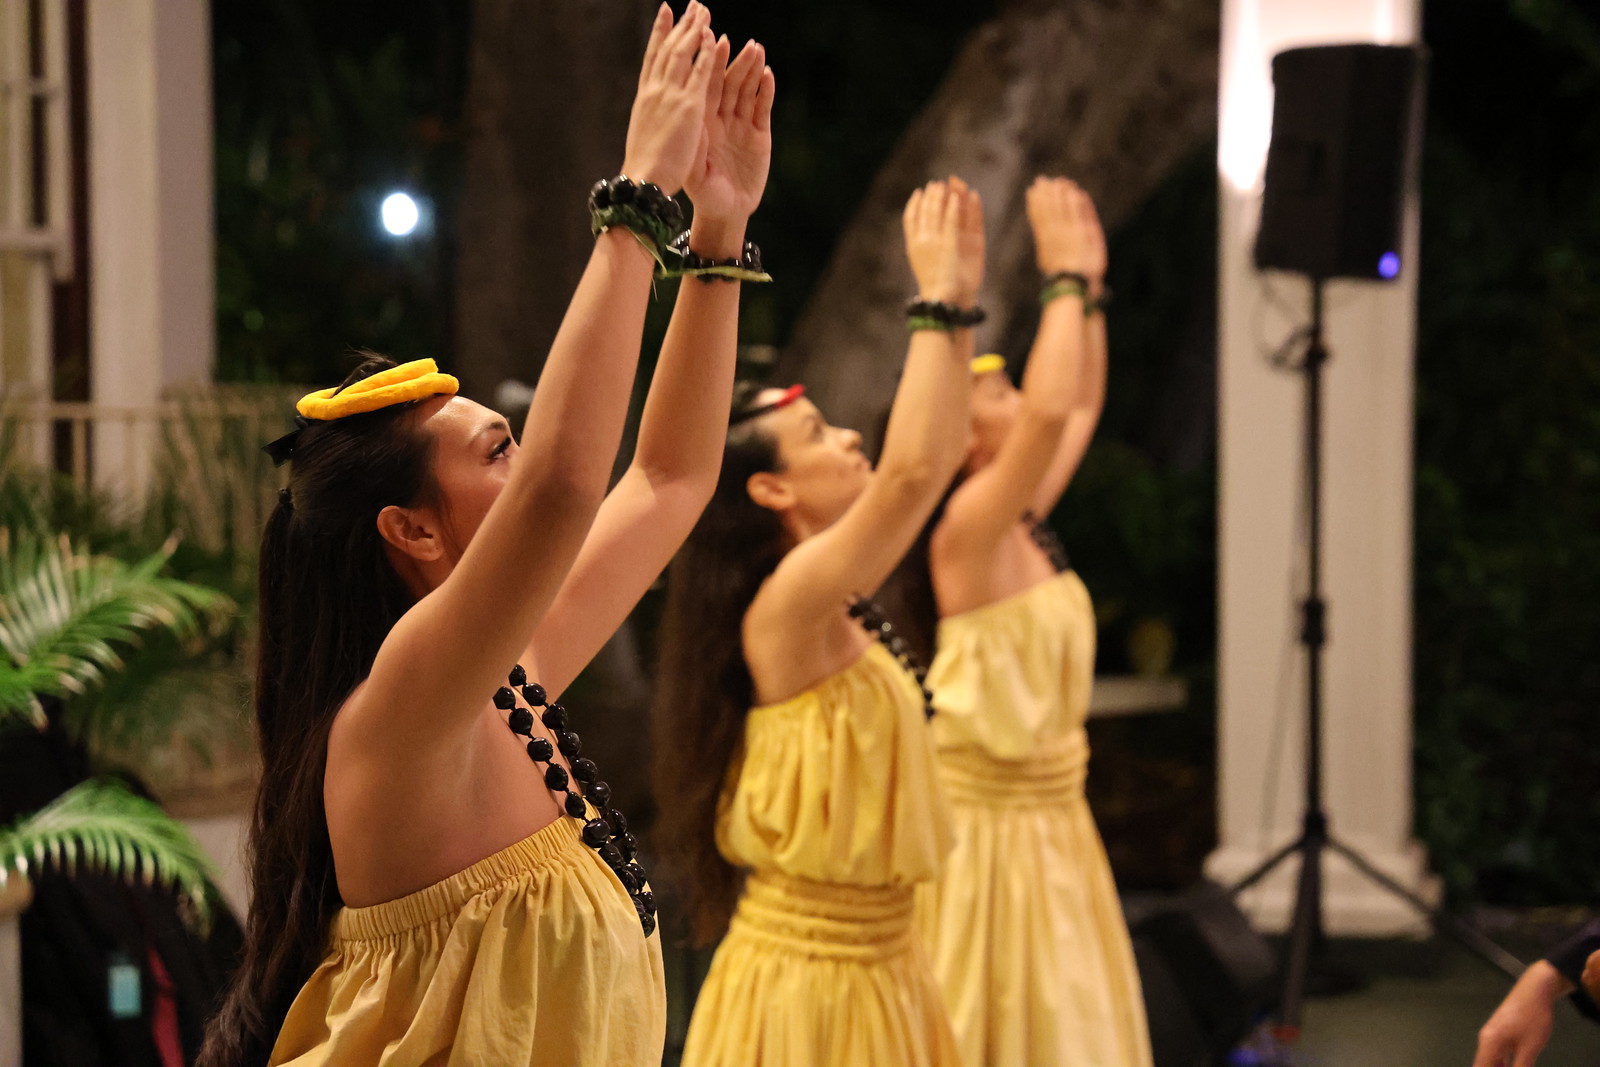 Dancers from Hawai’i. The 13th FestPAC in Hawai’i will celebrate and showcase Pacific arts and culture after eight long years since the 12th FestPAC in Guam in 1998.  